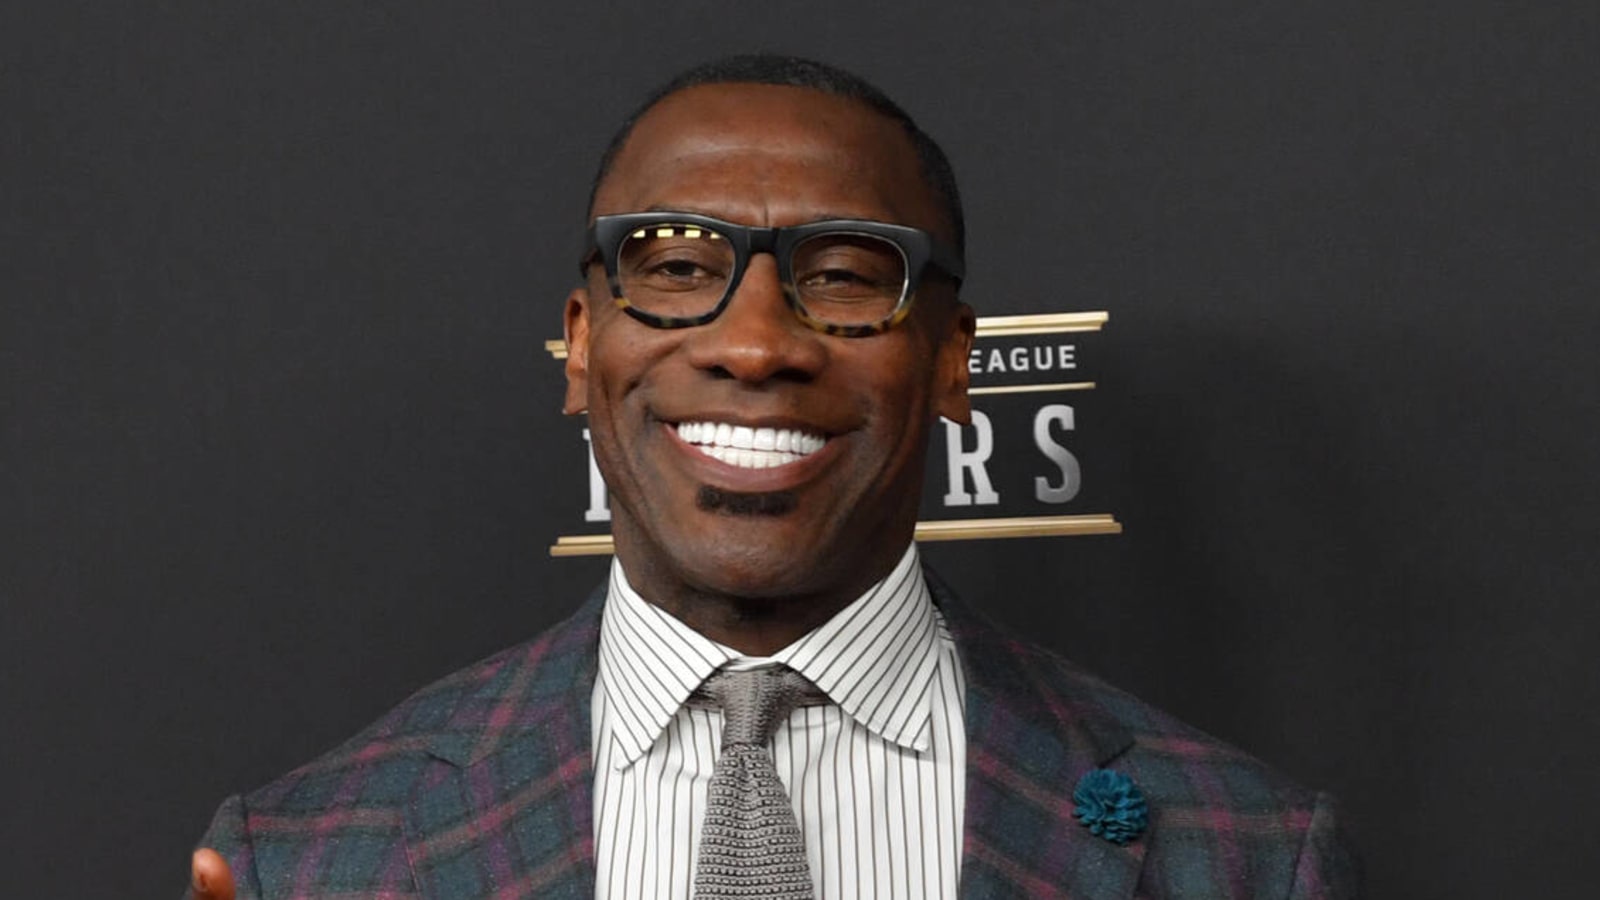 Is Shannon Sharpe going to succeed Stephen A. Smith on 'First Take'?